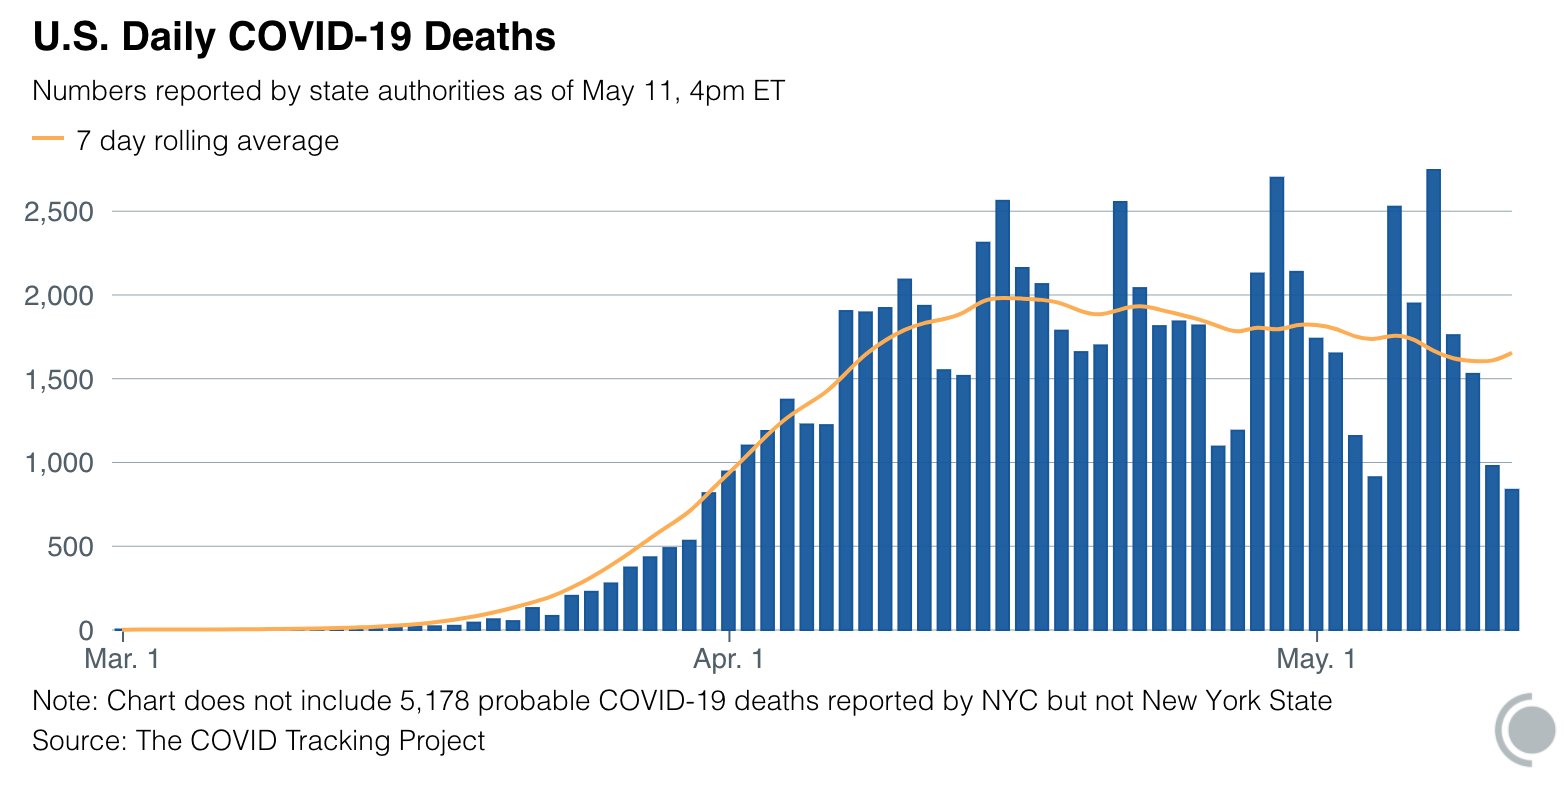 COVID Tracking Project - U.S. Daily COVID-19 Deaths